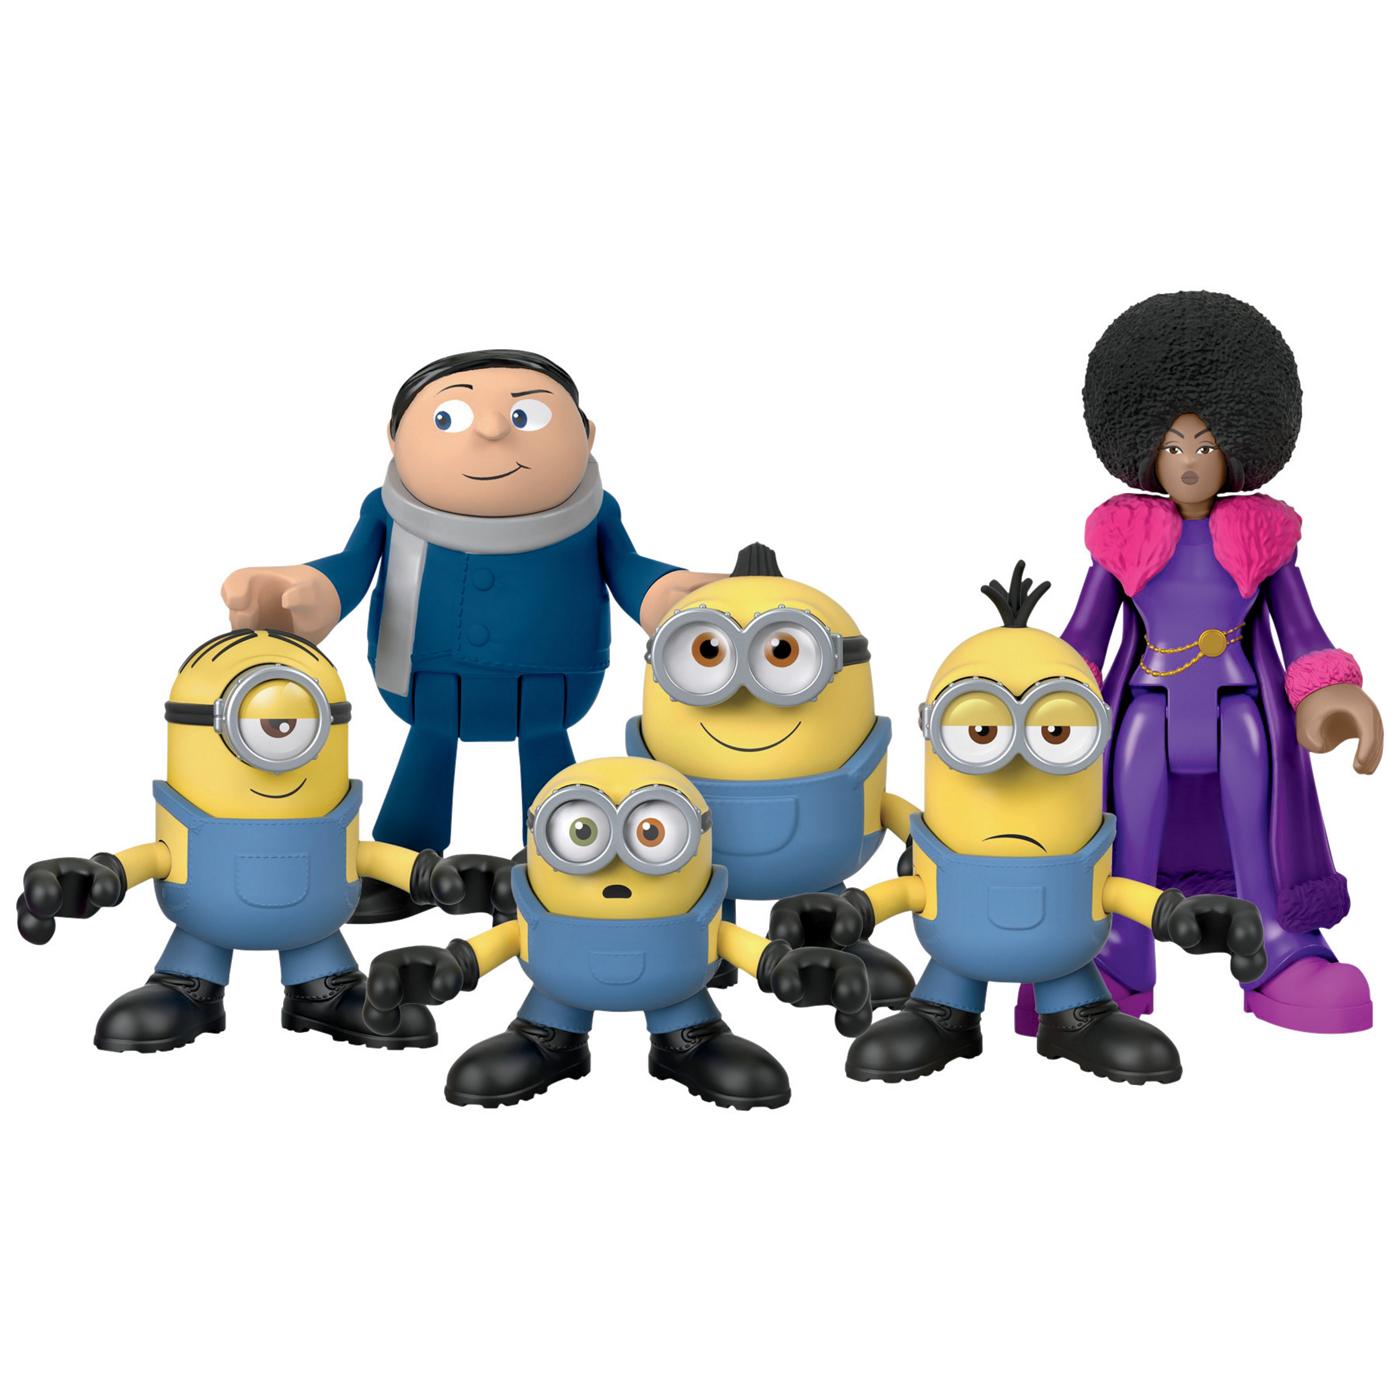 Fisher-Price Imaginext Minions: The Rise Of Gru Set; image 1 of 2